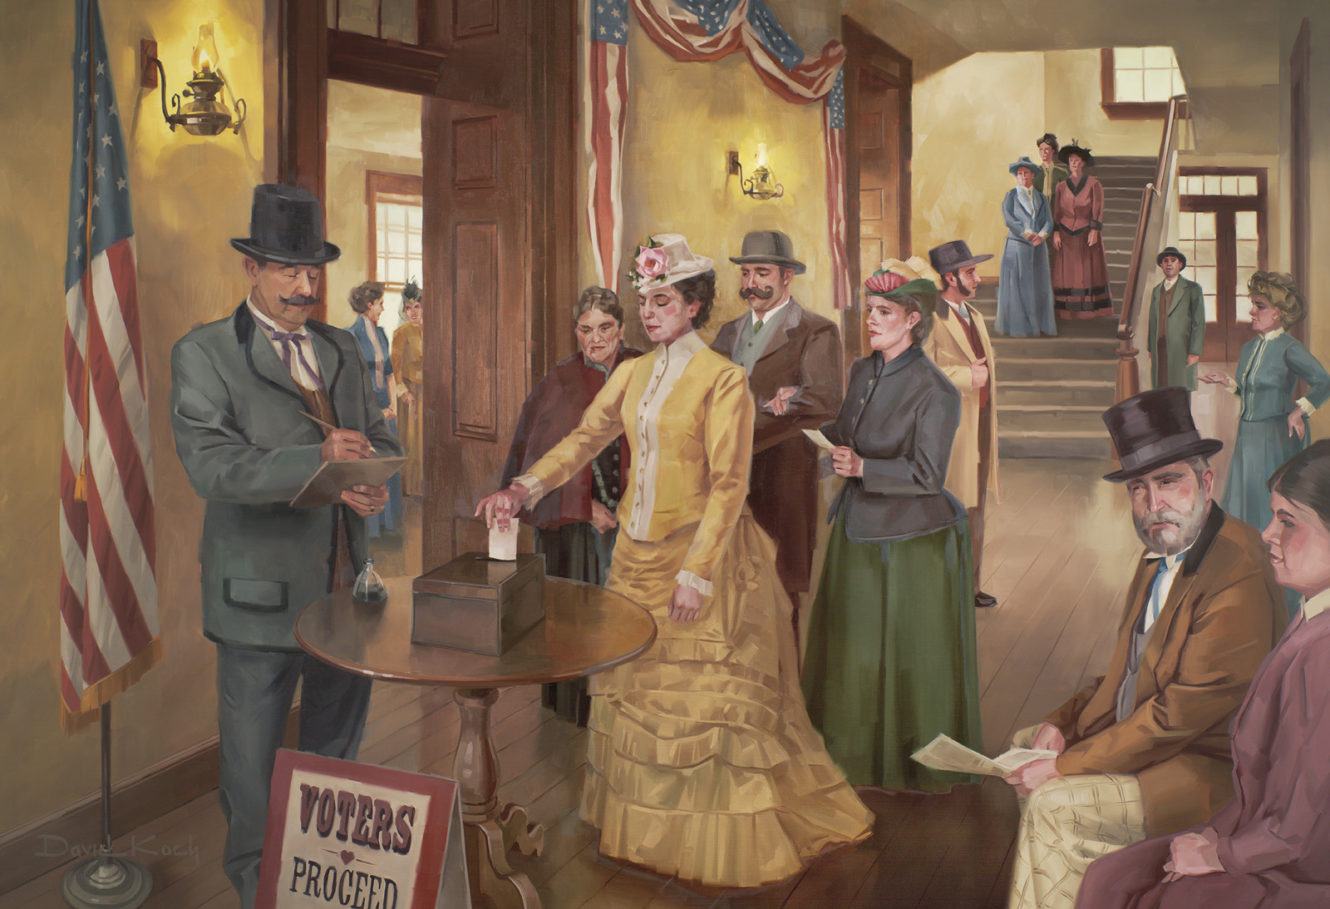 A mural in the Utah Capitol depicts schoolteacher Seraph Young casting the first vote by an American female on Valentine’s Day 1870.